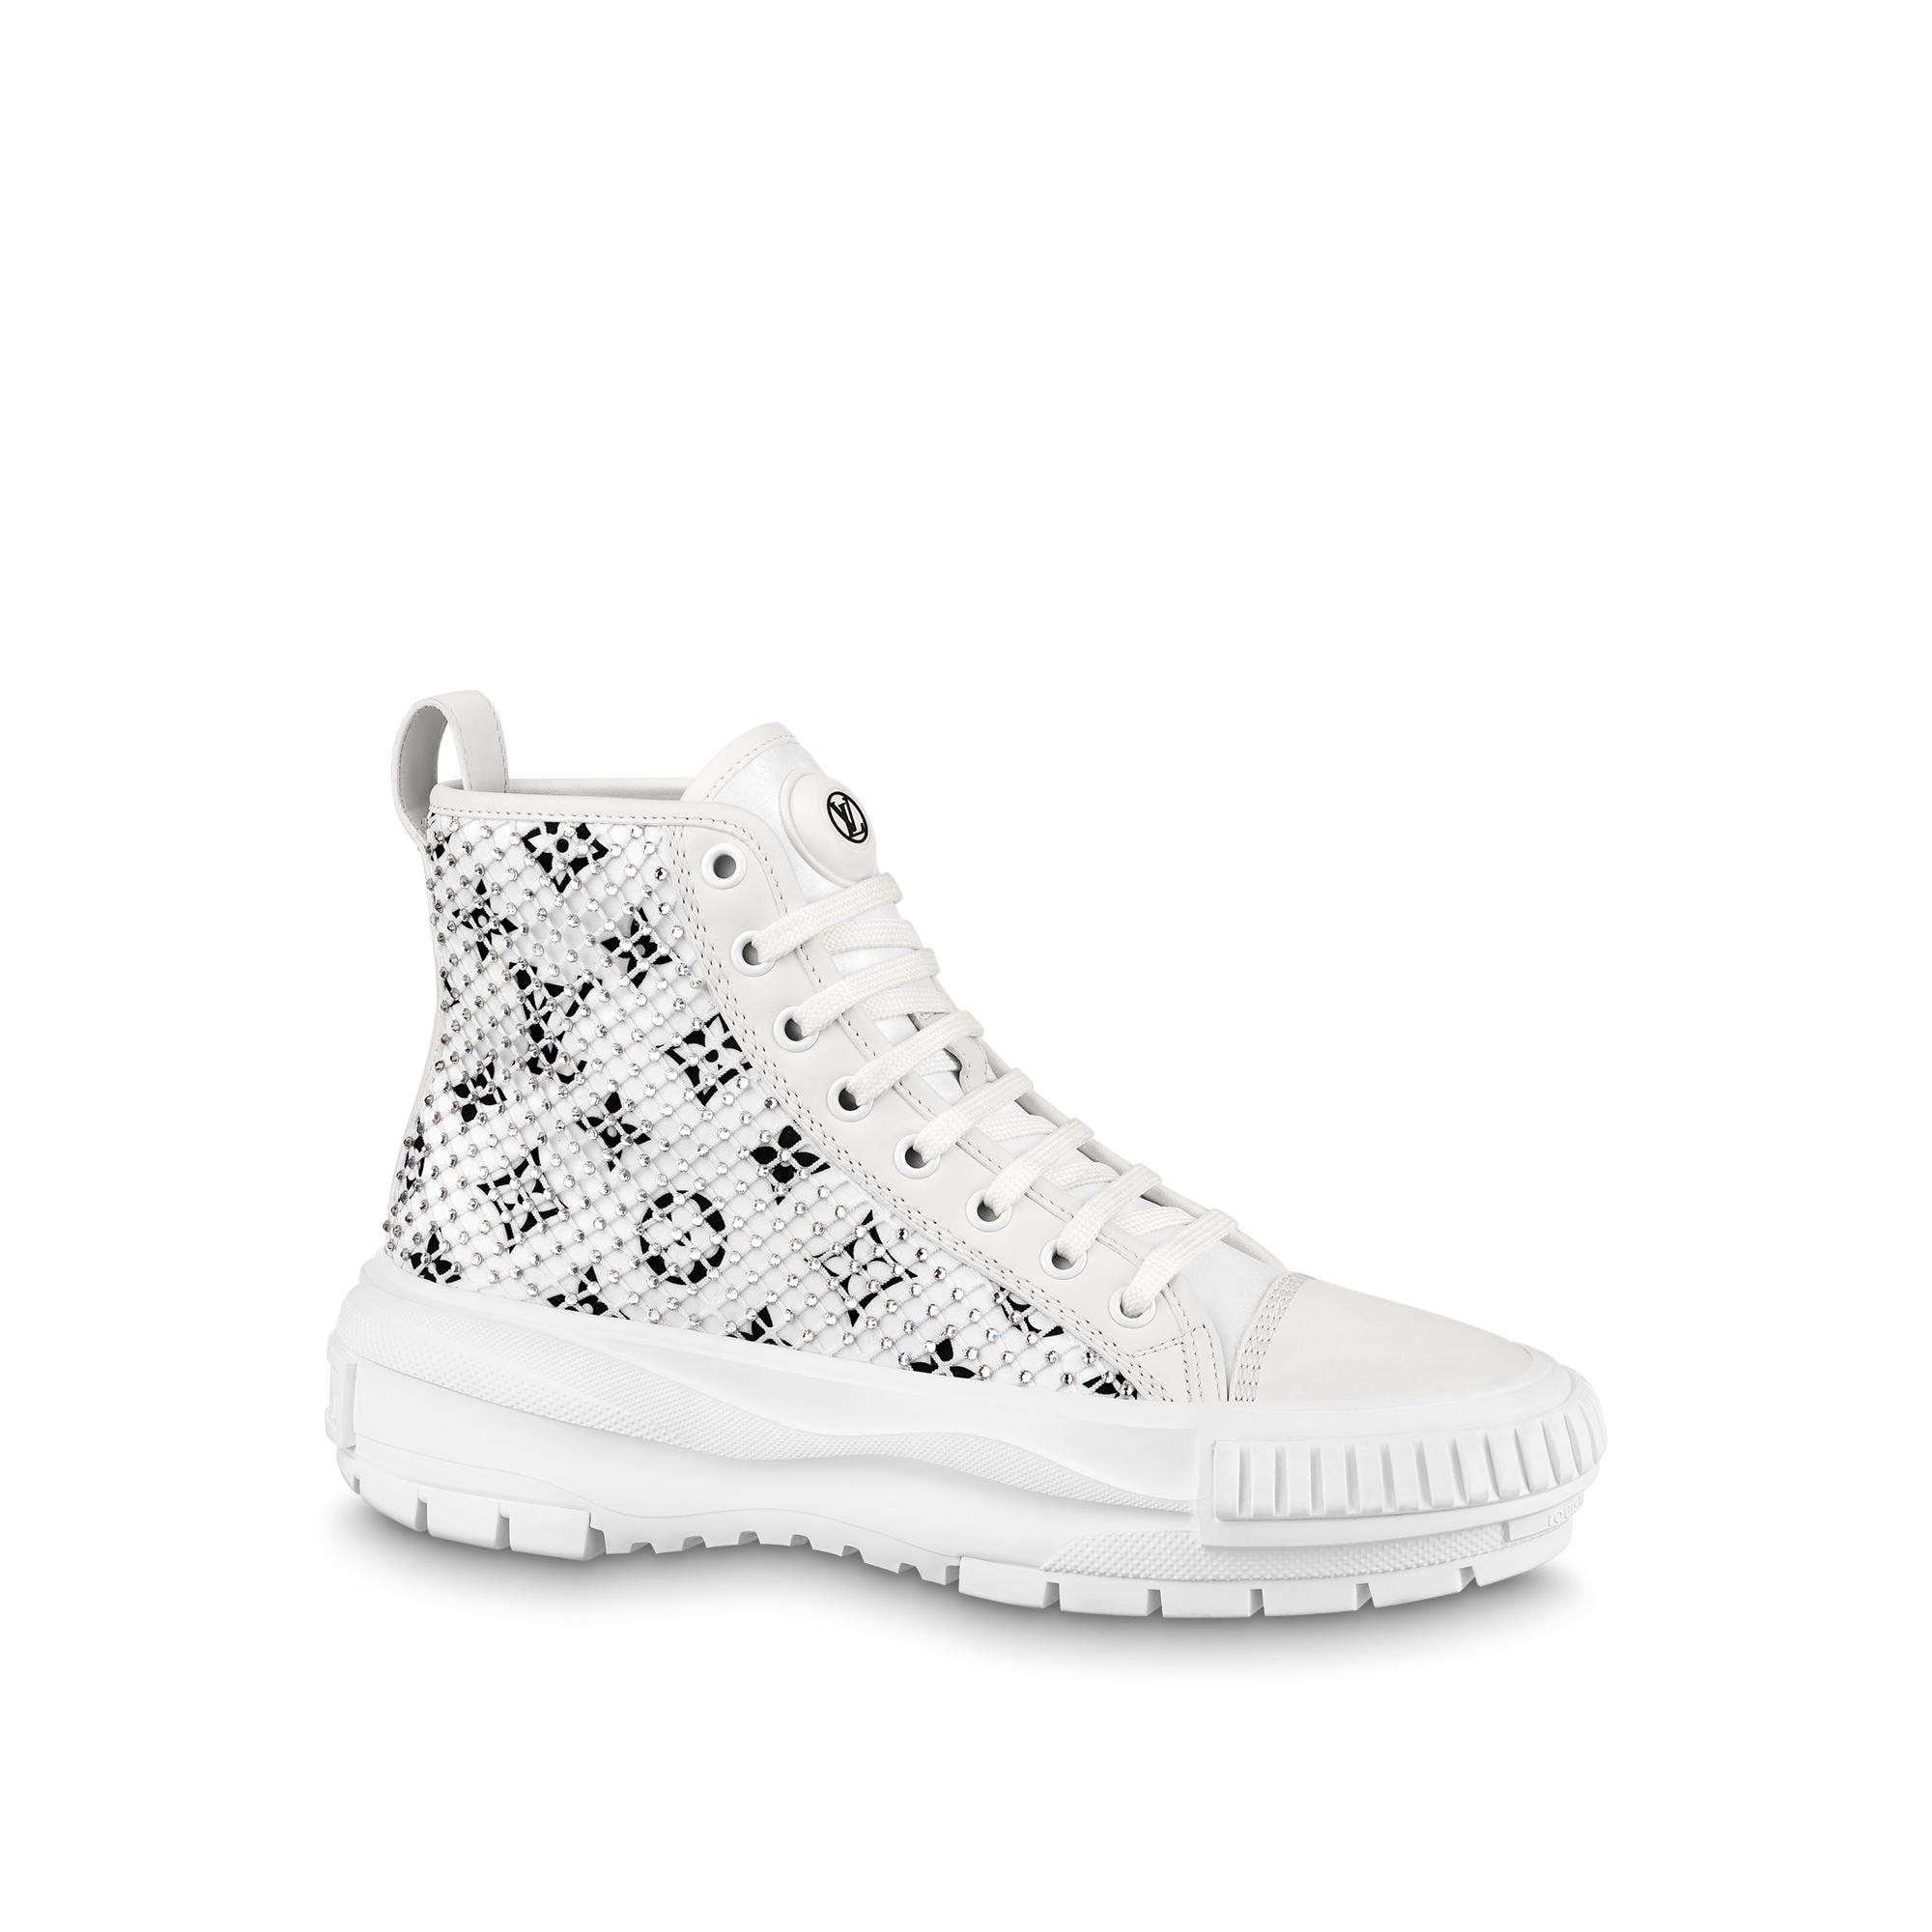 LOUIS VUITTON LOUIS VUITTON Squad Rhinestone Sneakers shoes leather White  Used Women #41